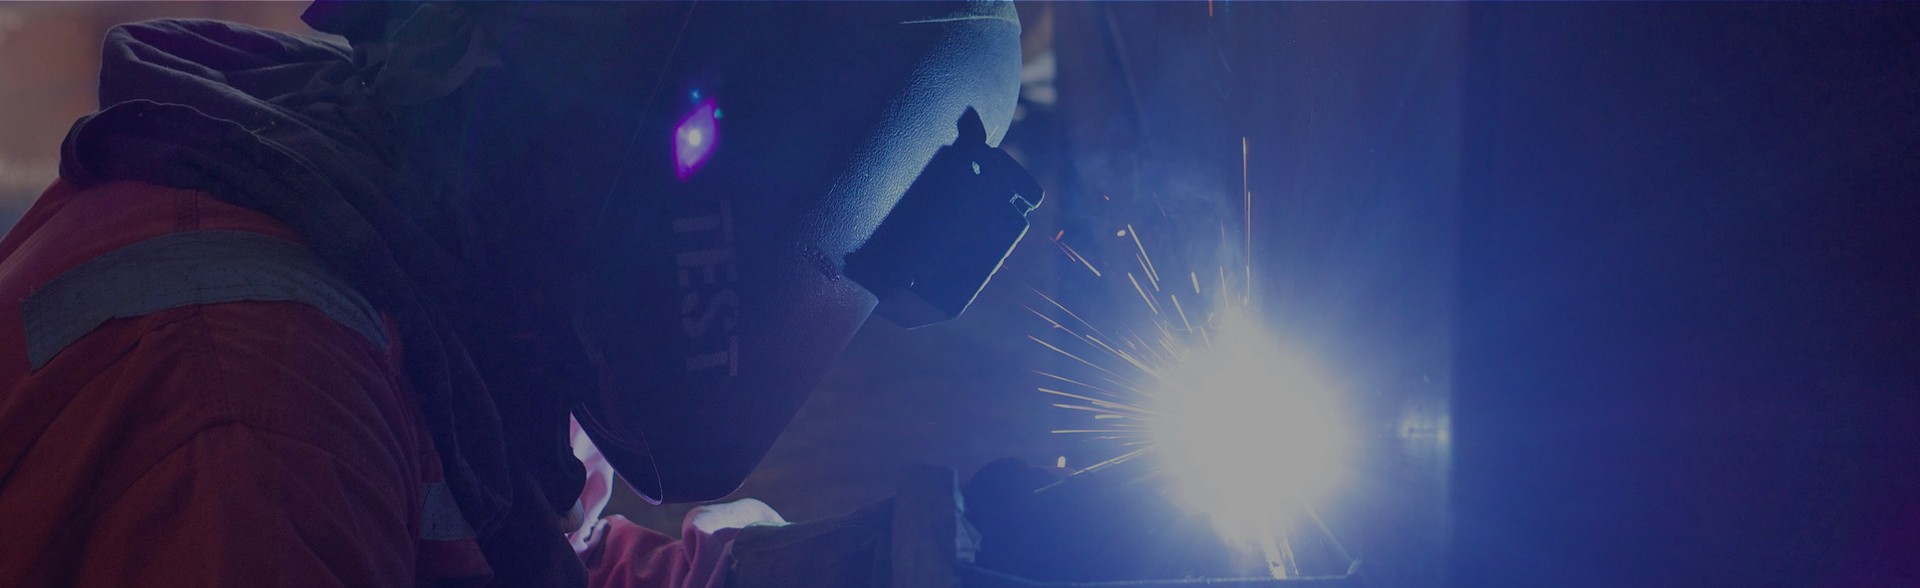 welding_banner_without-text